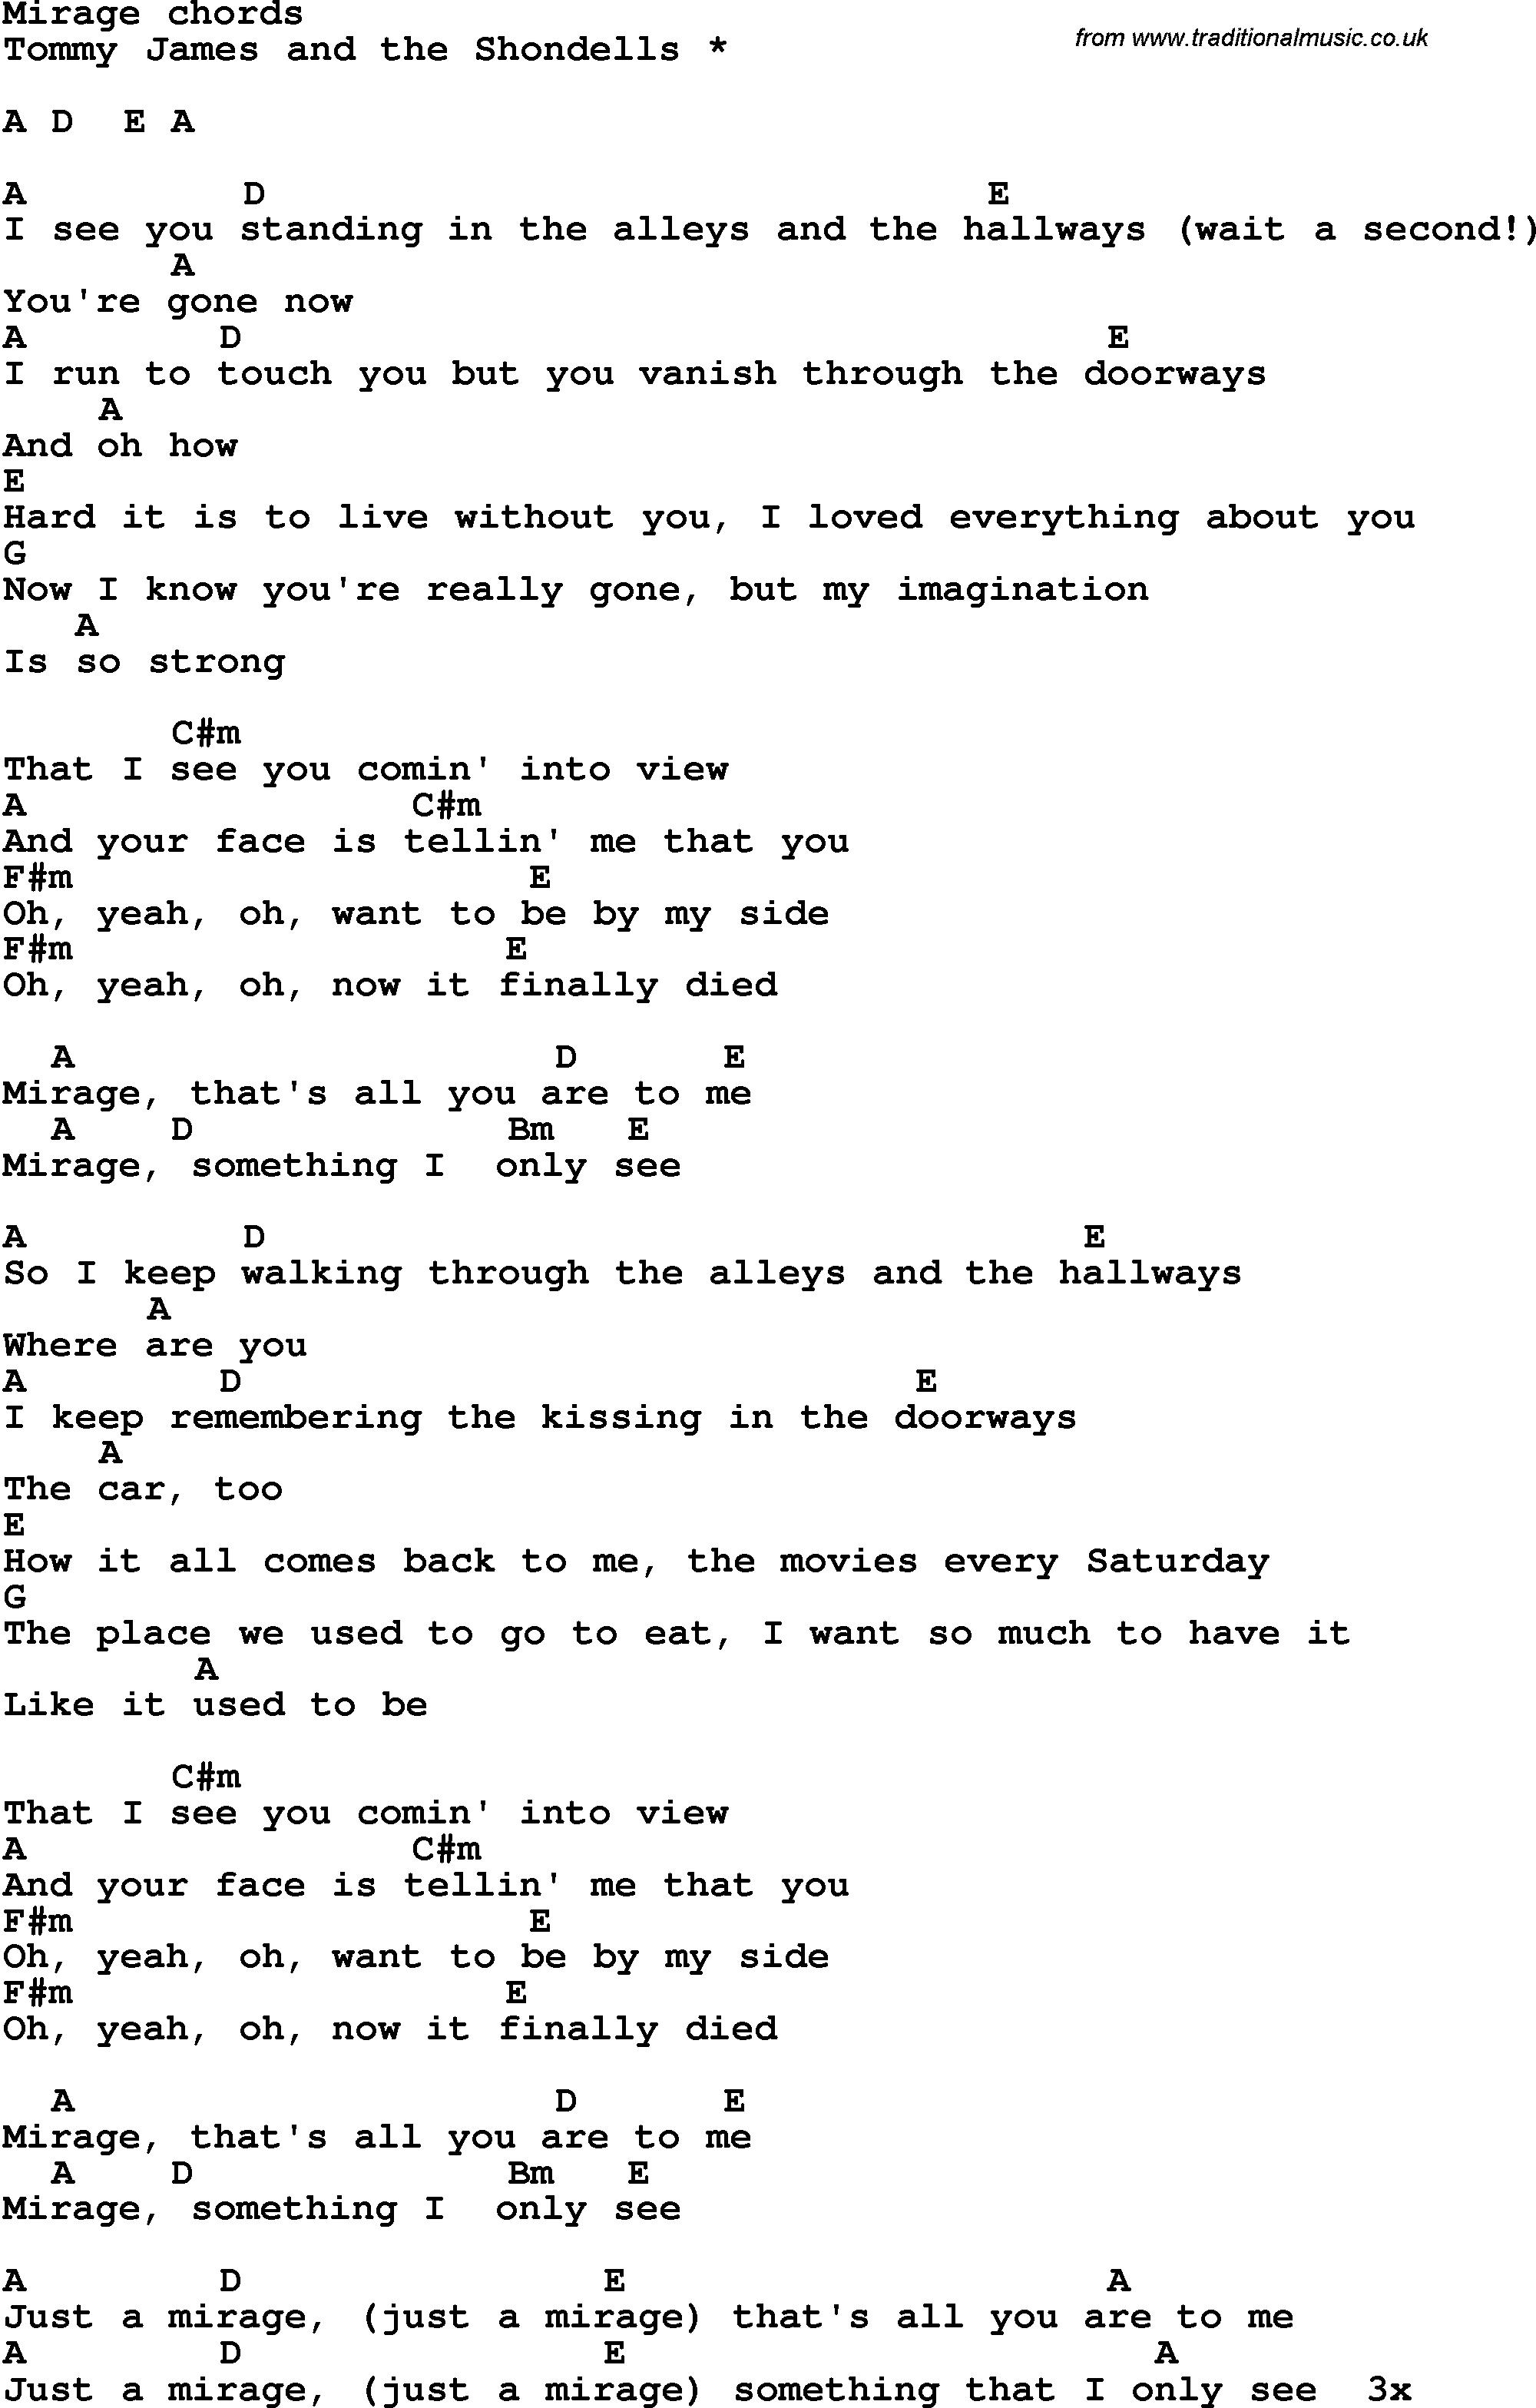 Song Lyrics with guitar chords for Mirage